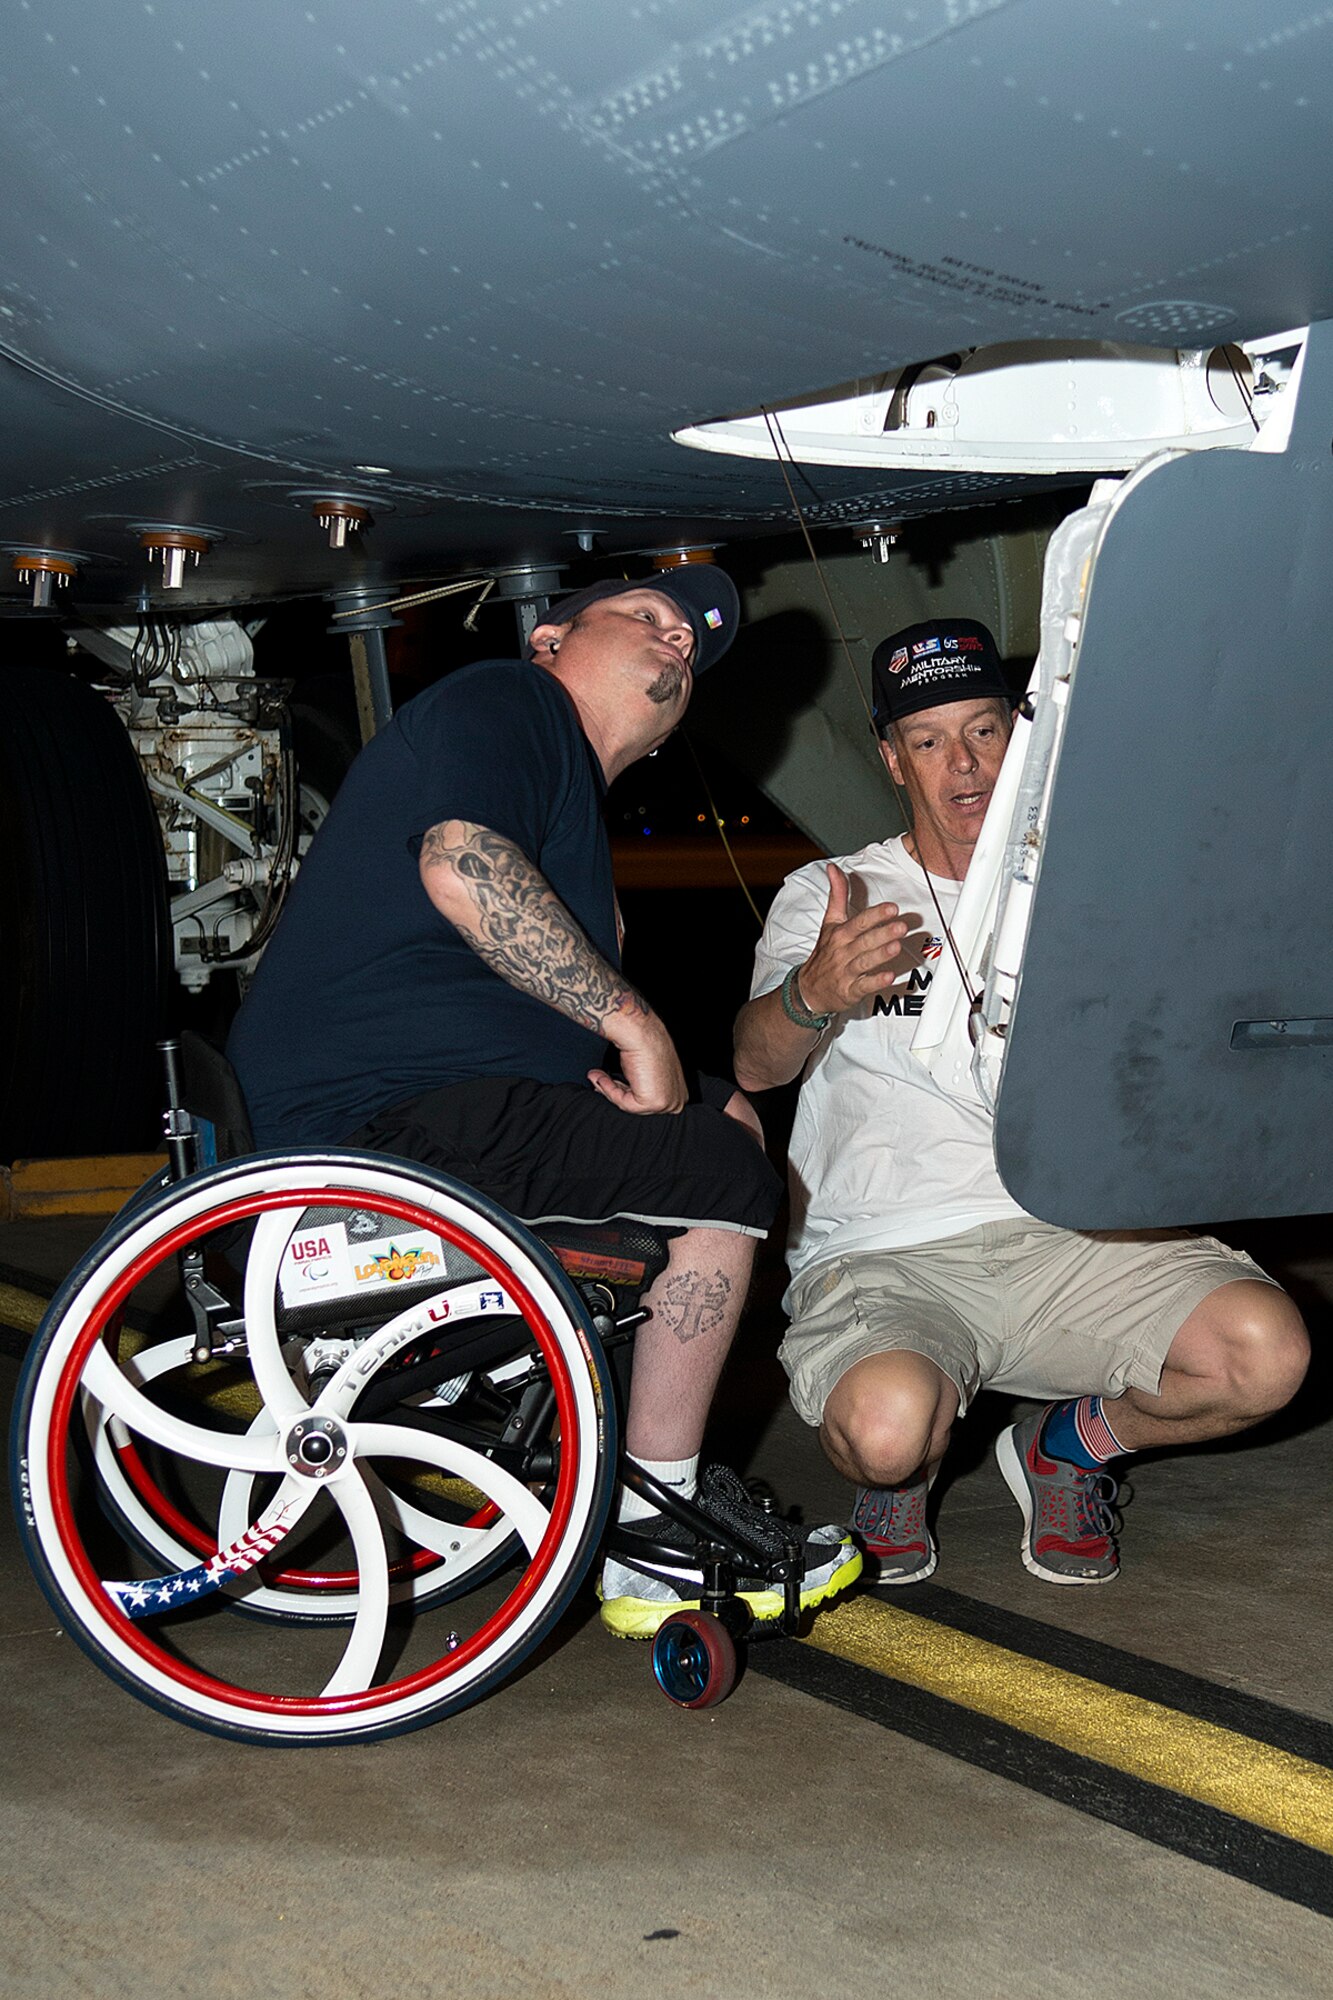 Patrick McDonald looks up the hatch of a 307th Bomb Wing B-52H Stratofortress before attempting to climb into the cockpit during a tour, June 4, 2014, Barksdale Air Force Base, La. McDonald, a U.S. Army veteran, was paralyzed in 1991 as the result of an accident while serving with the Army in South Korea, joined the American300 Tours to share his experience with fellow military service members as part of the tour's 'Never Quit Series'. (U.S. Air Force photo by Master Sgt. Greg Steele/Released)